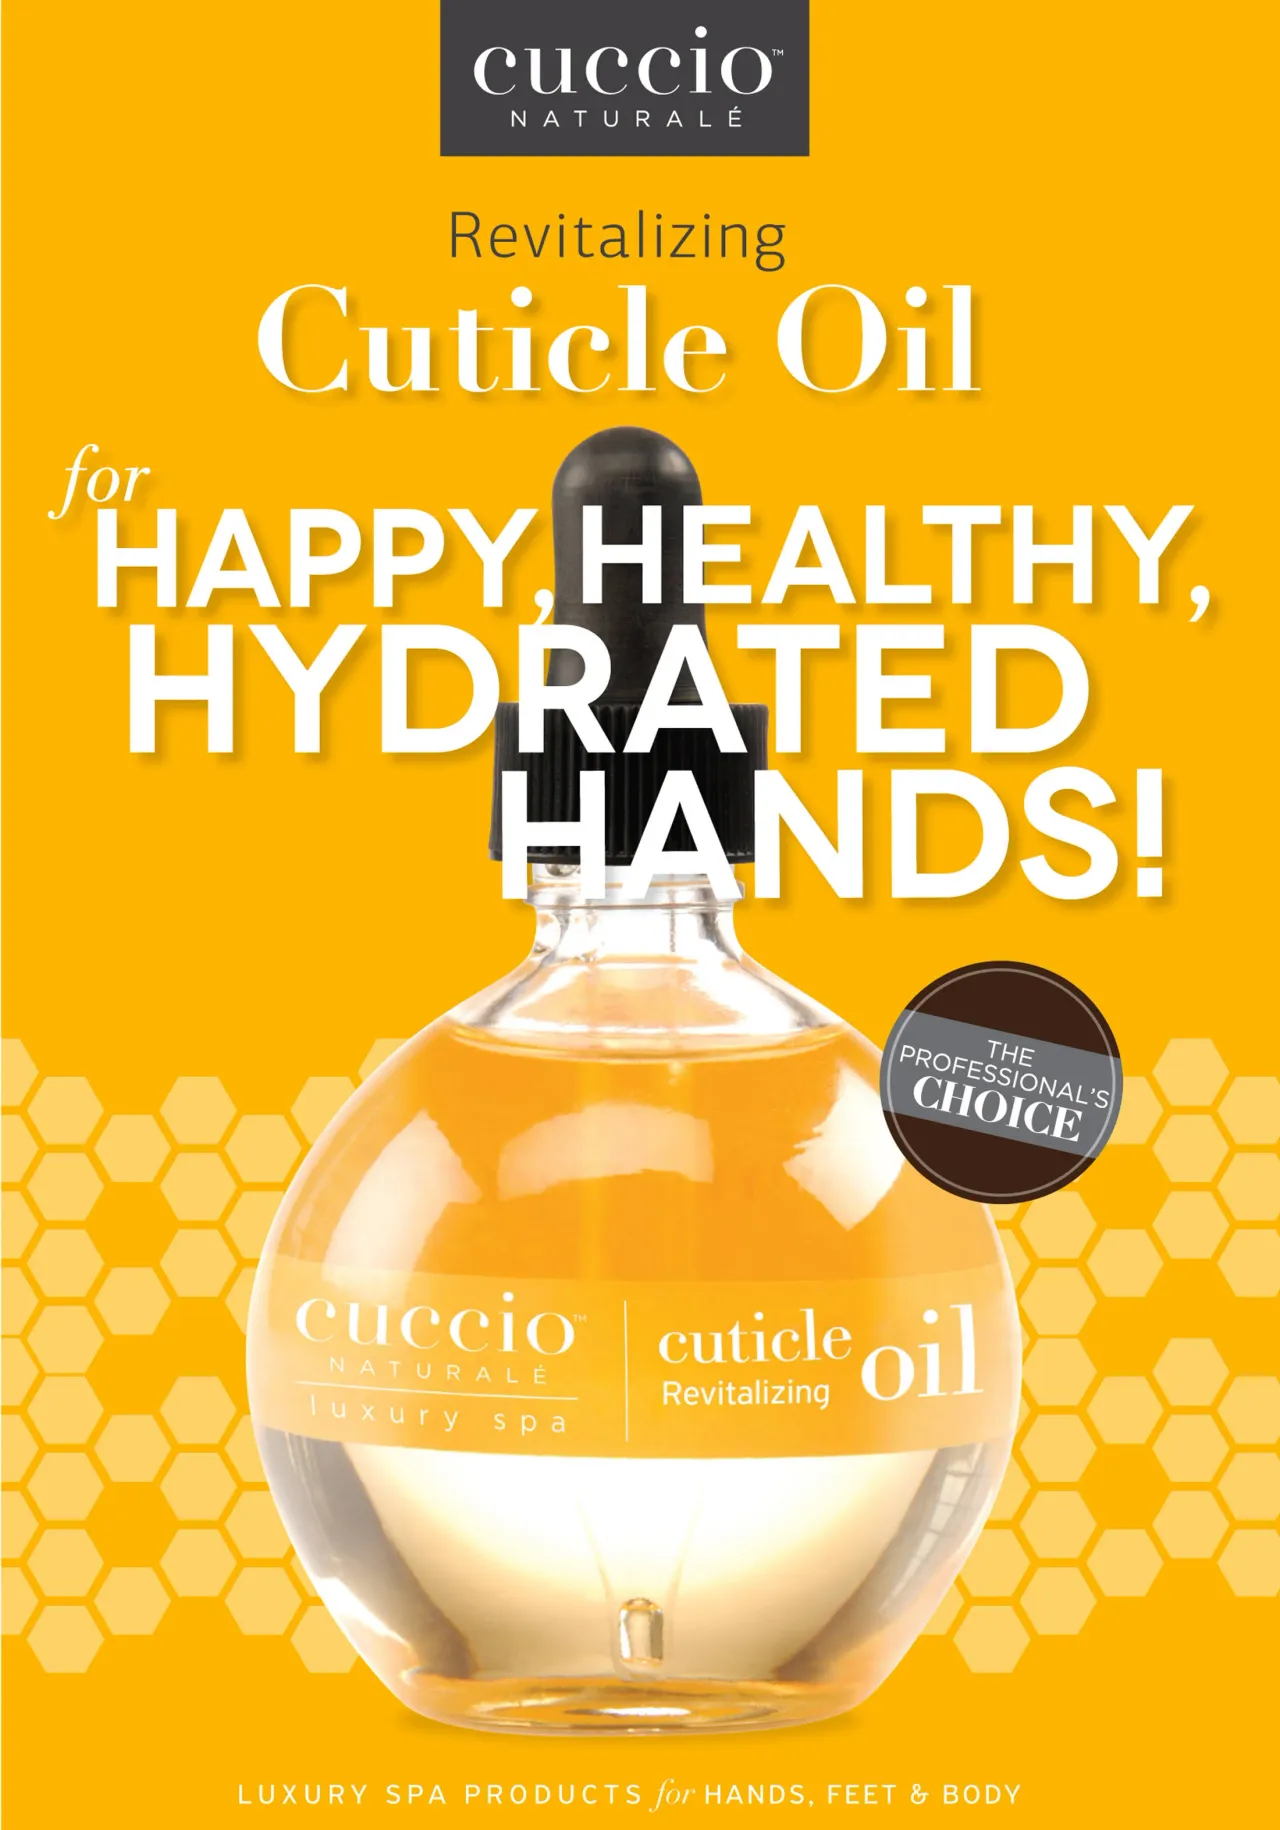 7 Cuccio Naturale Honey and Milk Cuticle Oil - Enhances Nail and Cuticle Health - Calming and Nurturing - Free of Harmful Chemicals and Animal Testing - 2.5 oz